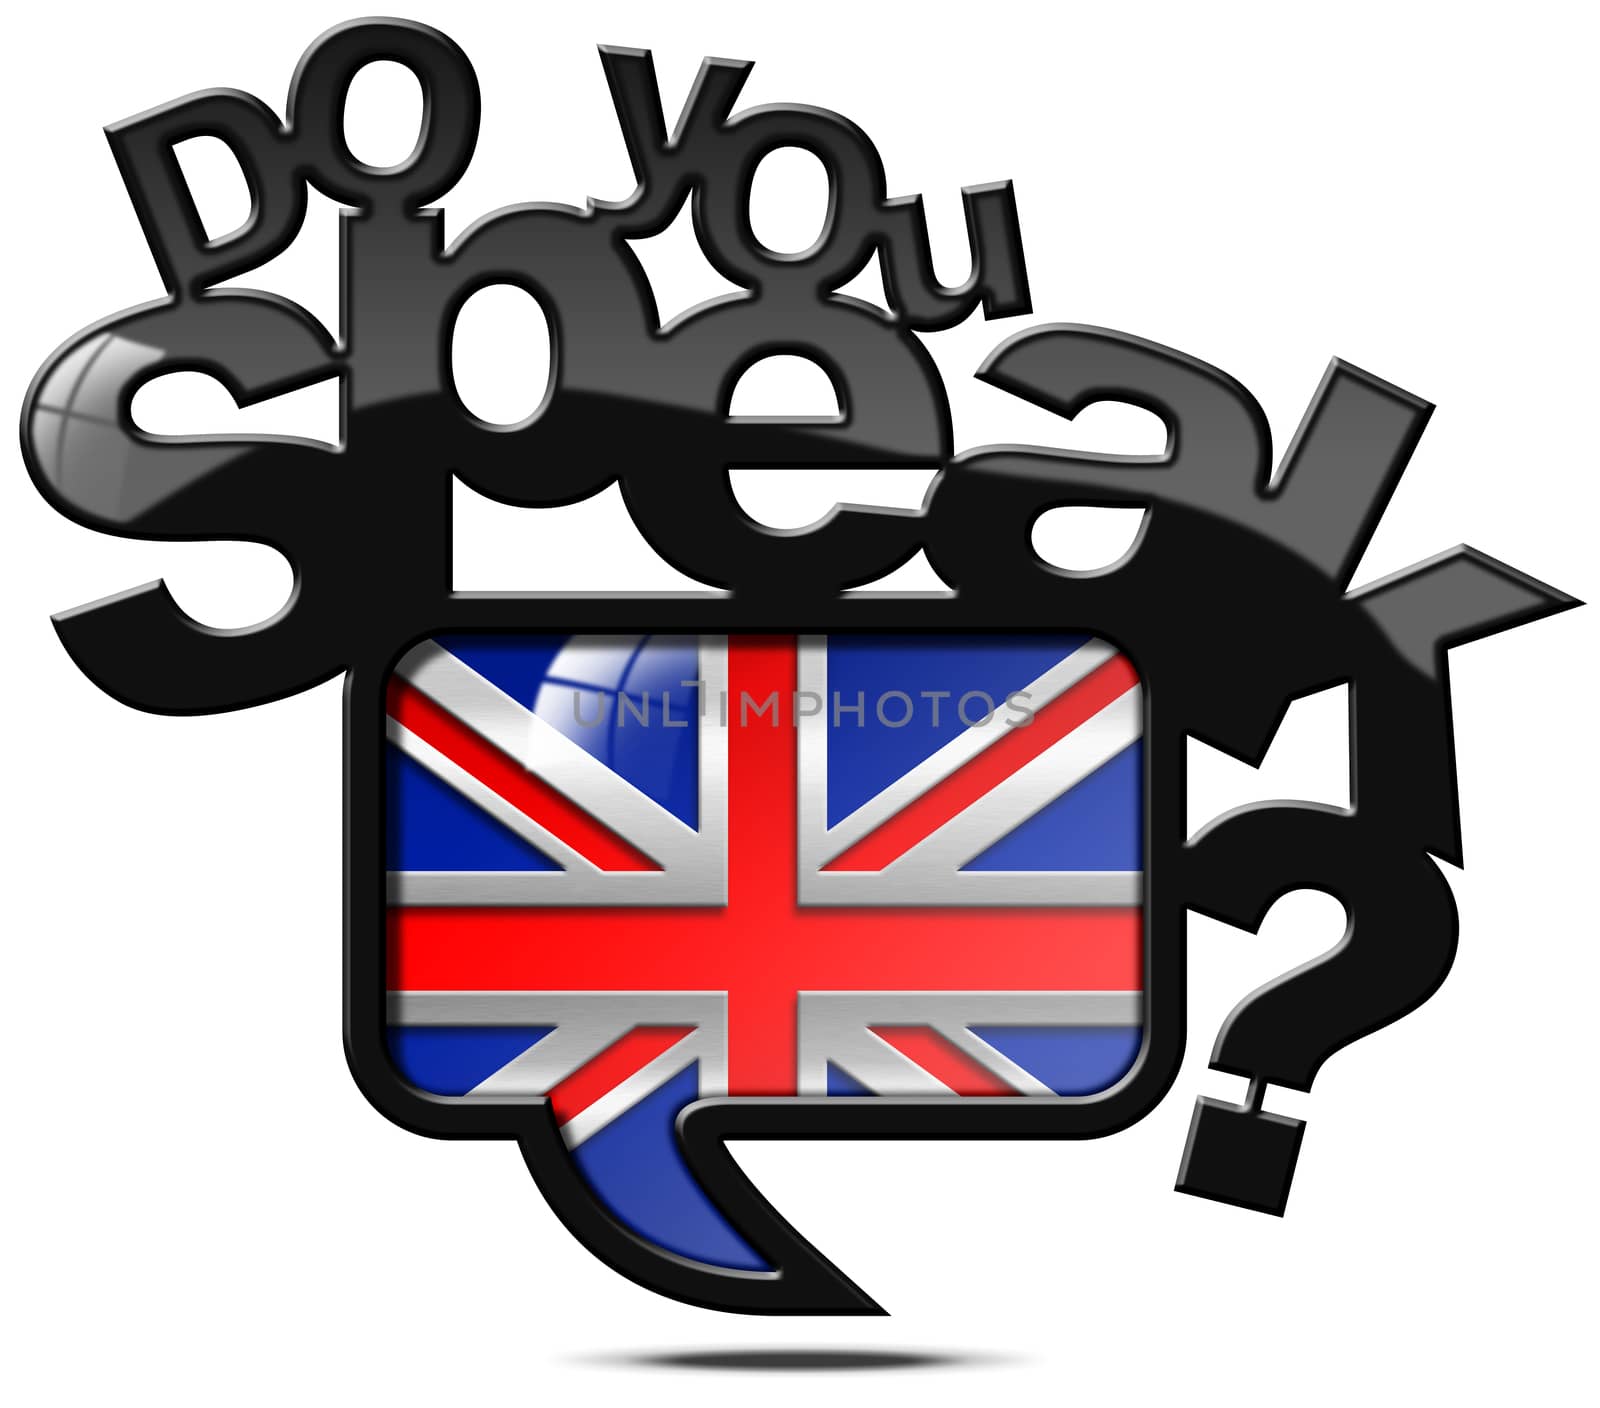 Do You Speak English - Speech Bubble by catalby